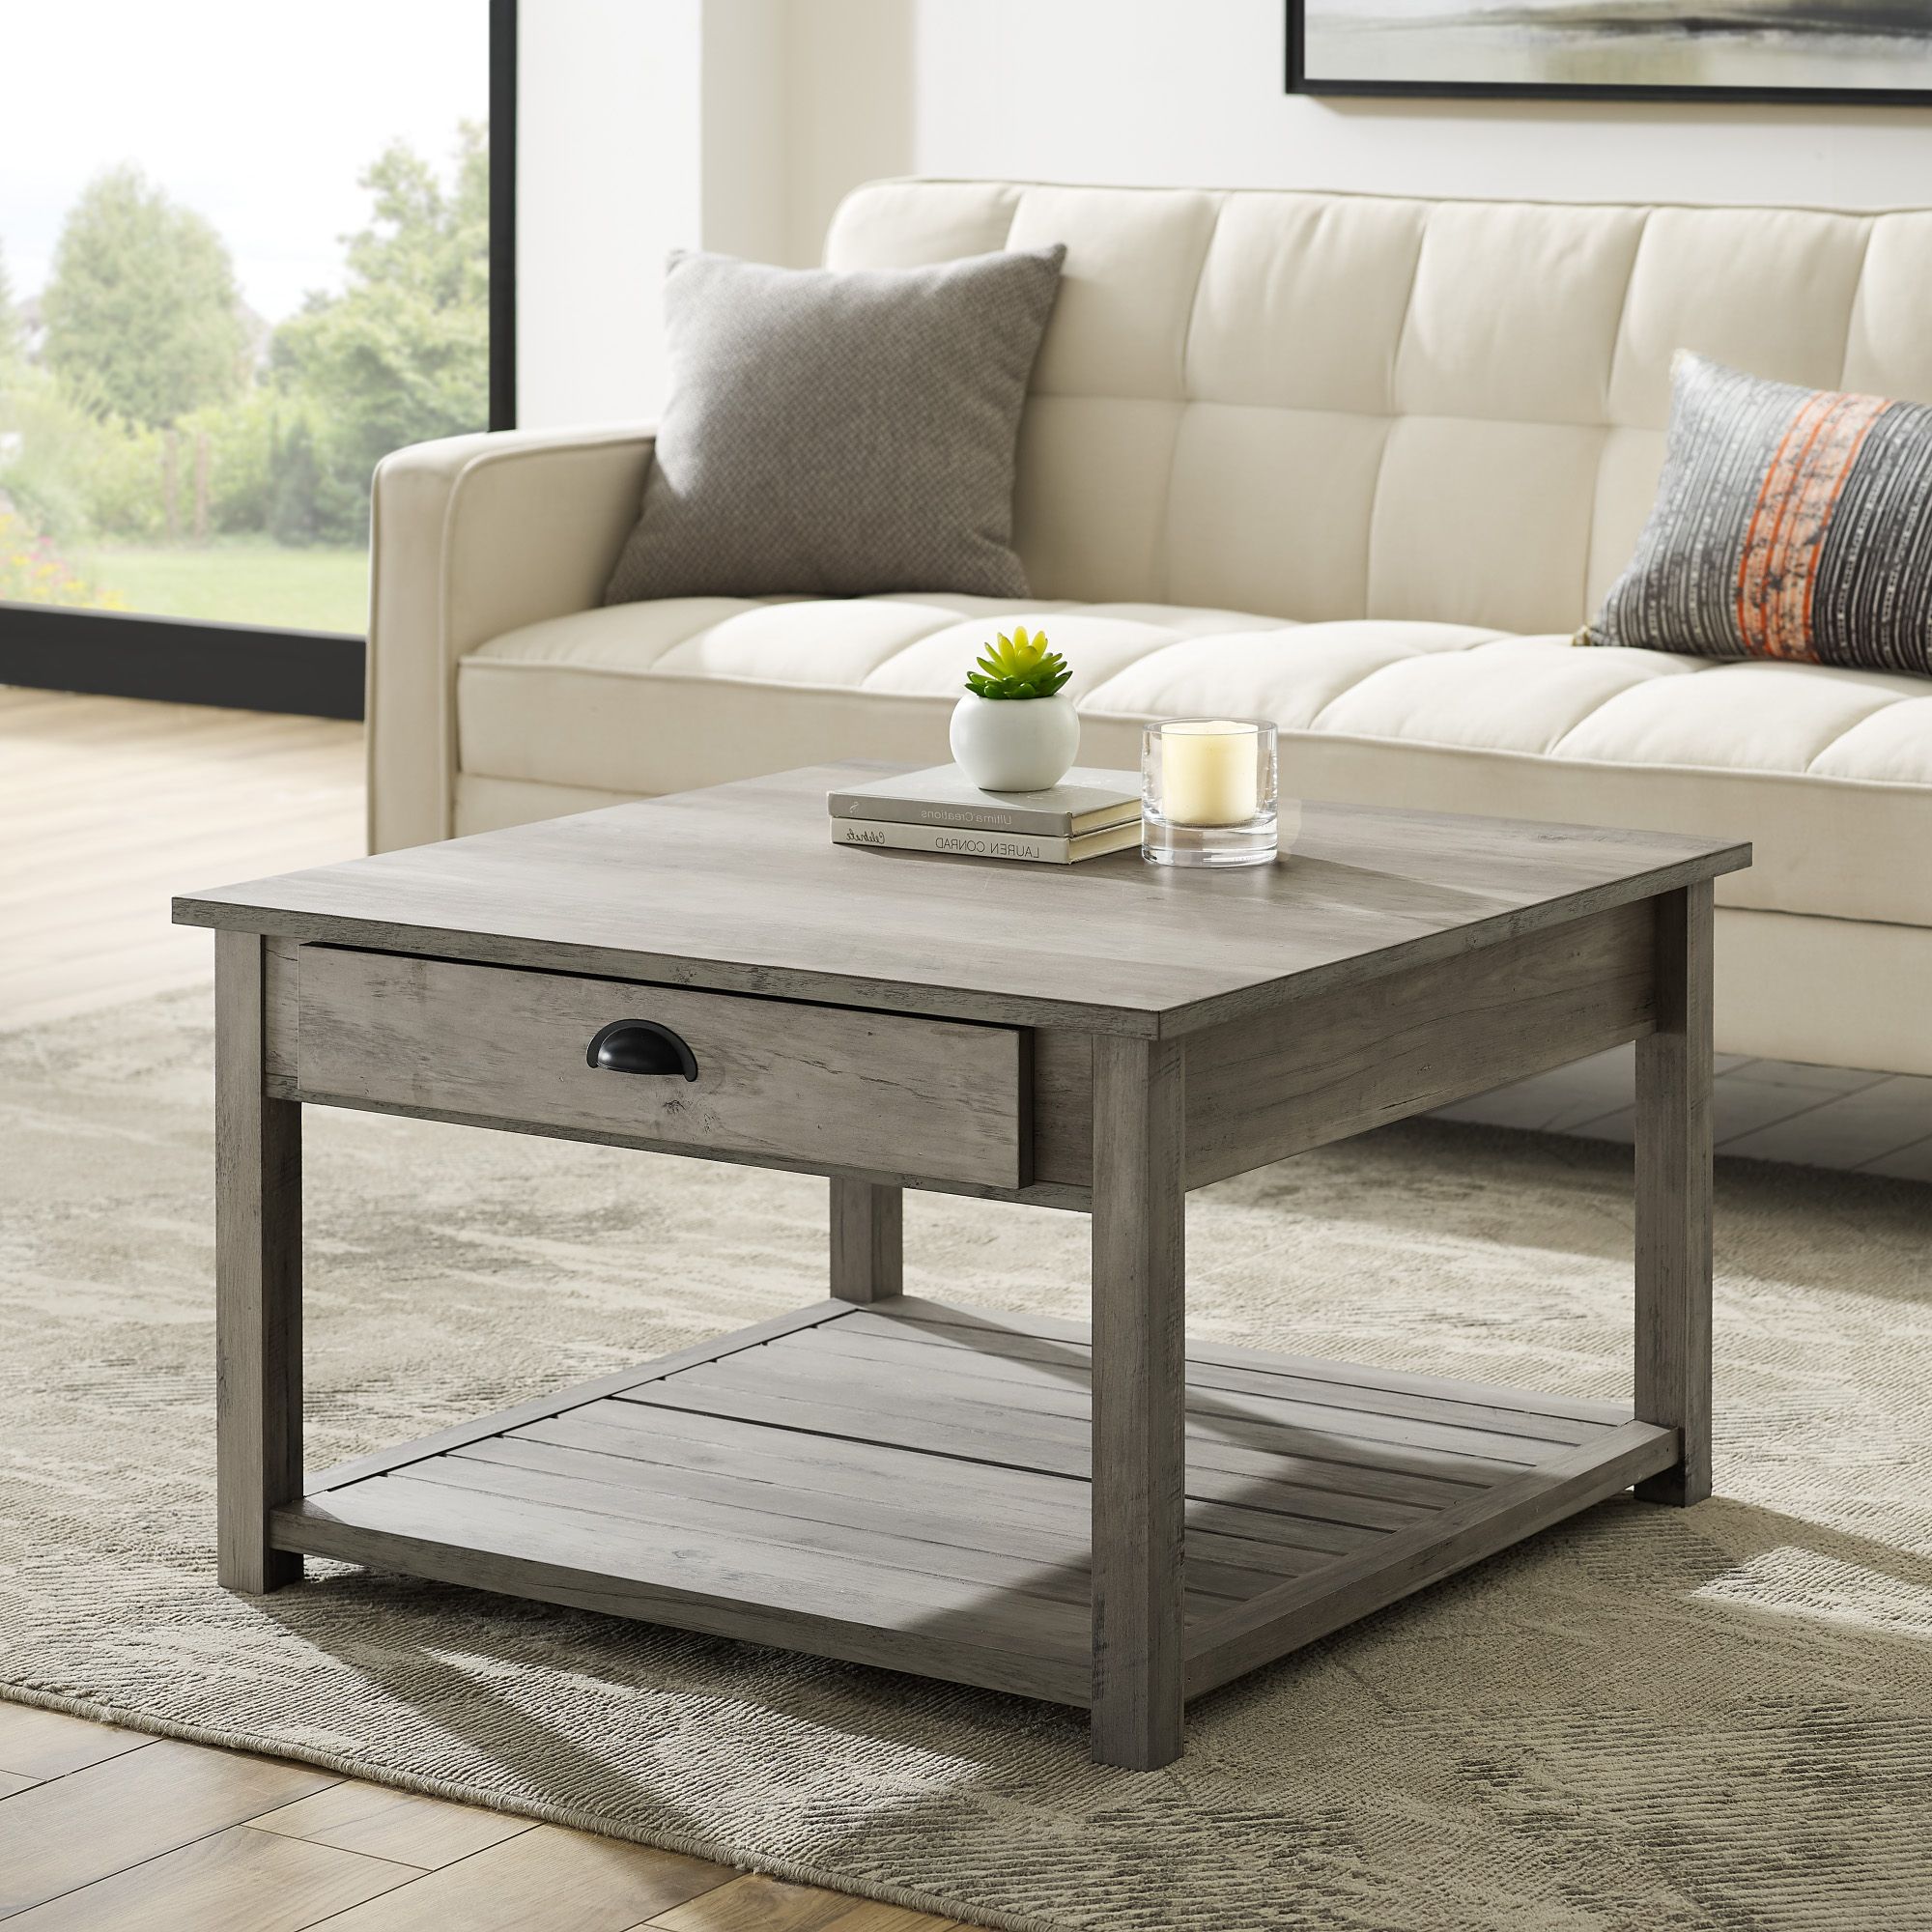 Gray Driftwood Storage Coffee Tables Throughout Most Up To Date Manor Park 30 Inch Square Country Coffee Table, Grey Wash – Walmart (View 5 of 10)